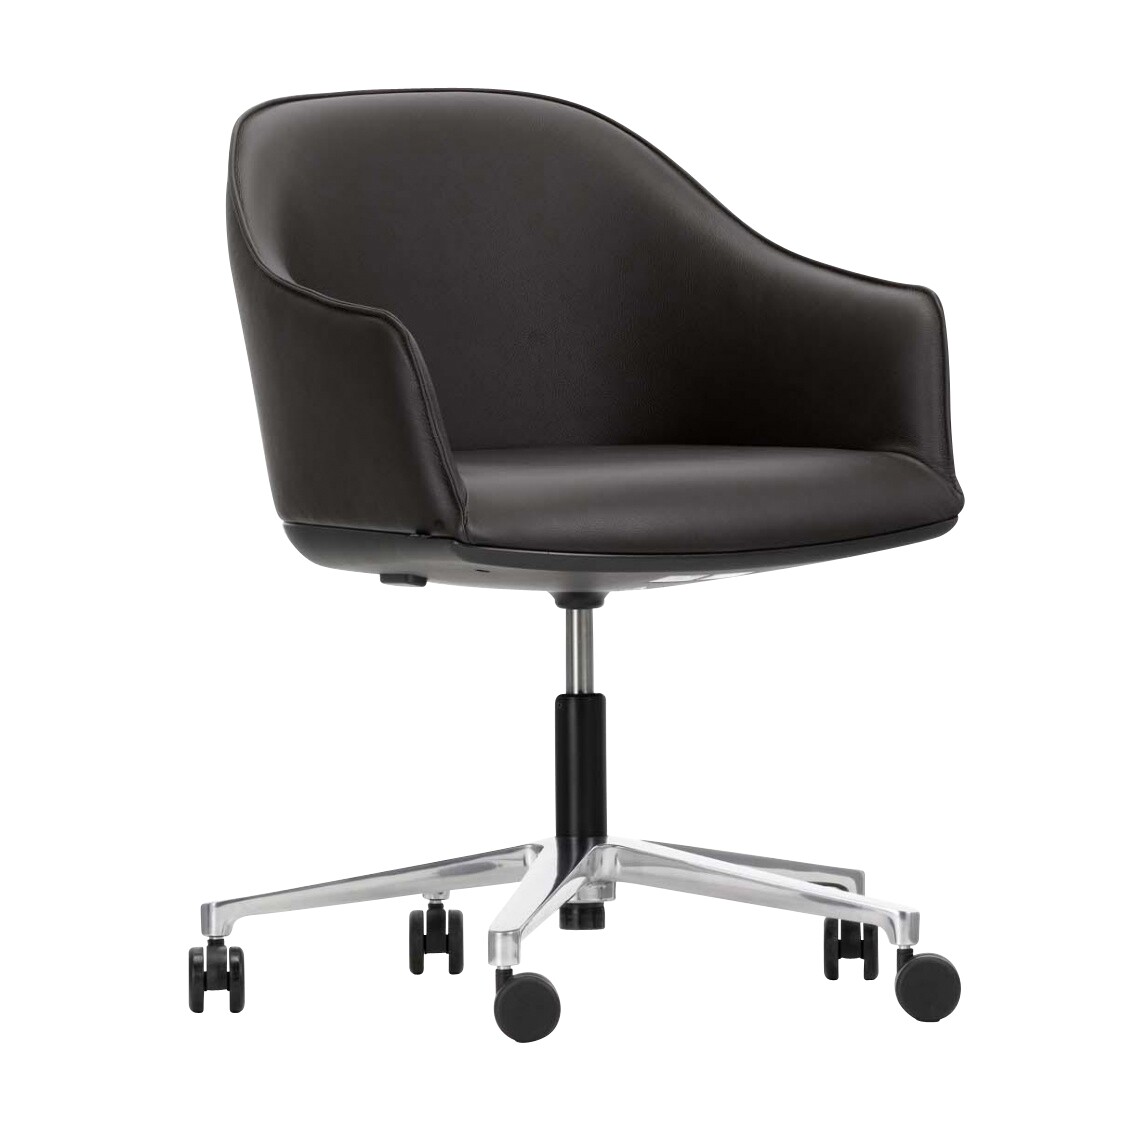 Vitra Softshell Chair Office Chair Ambientedirect